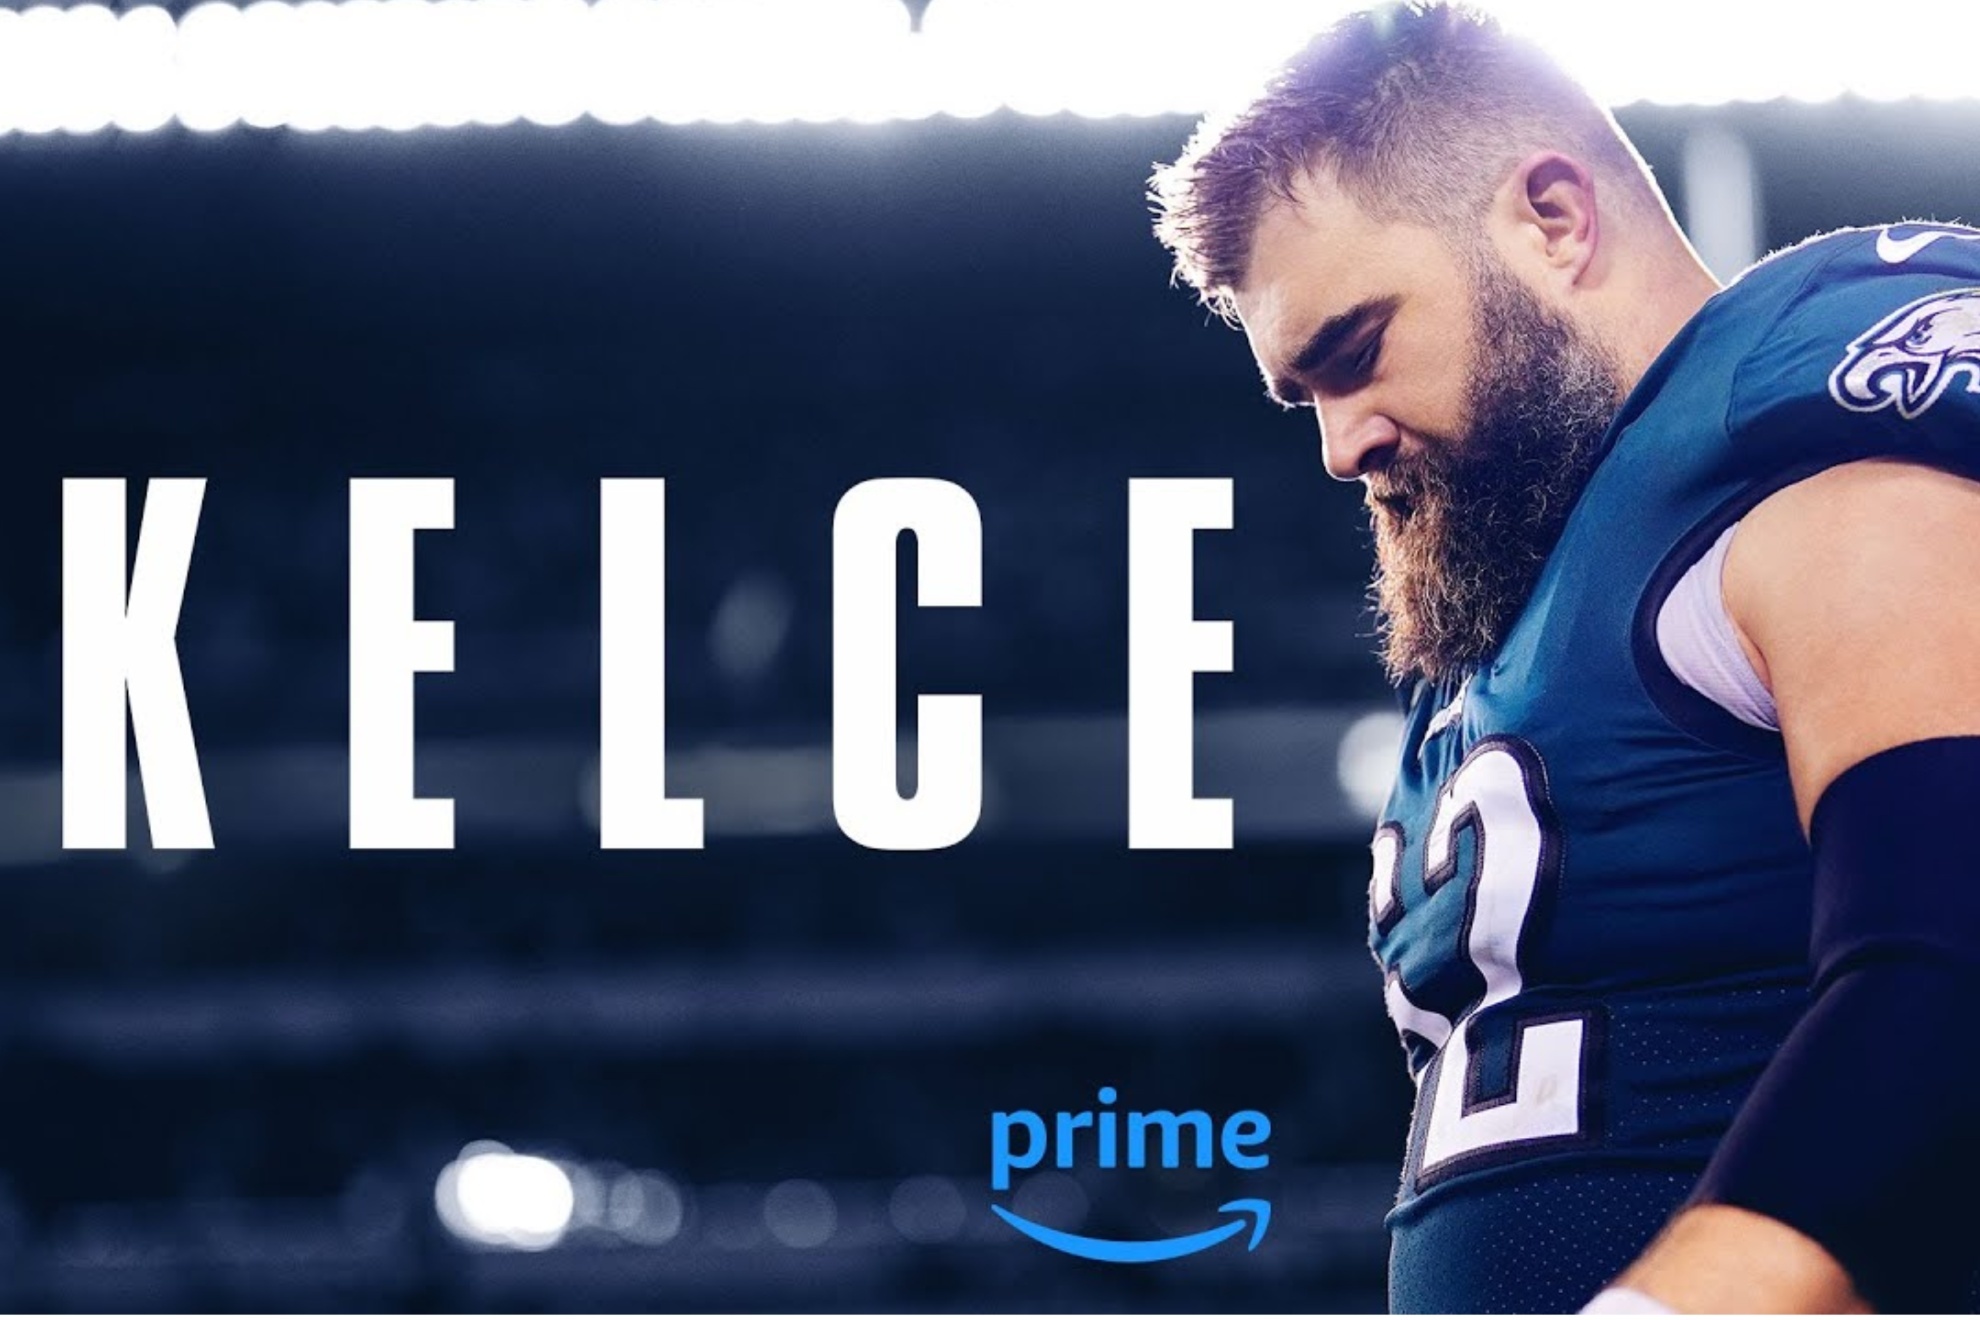 The former Eagles center, Jason Kelce, has been nominated for two Emmy Awards